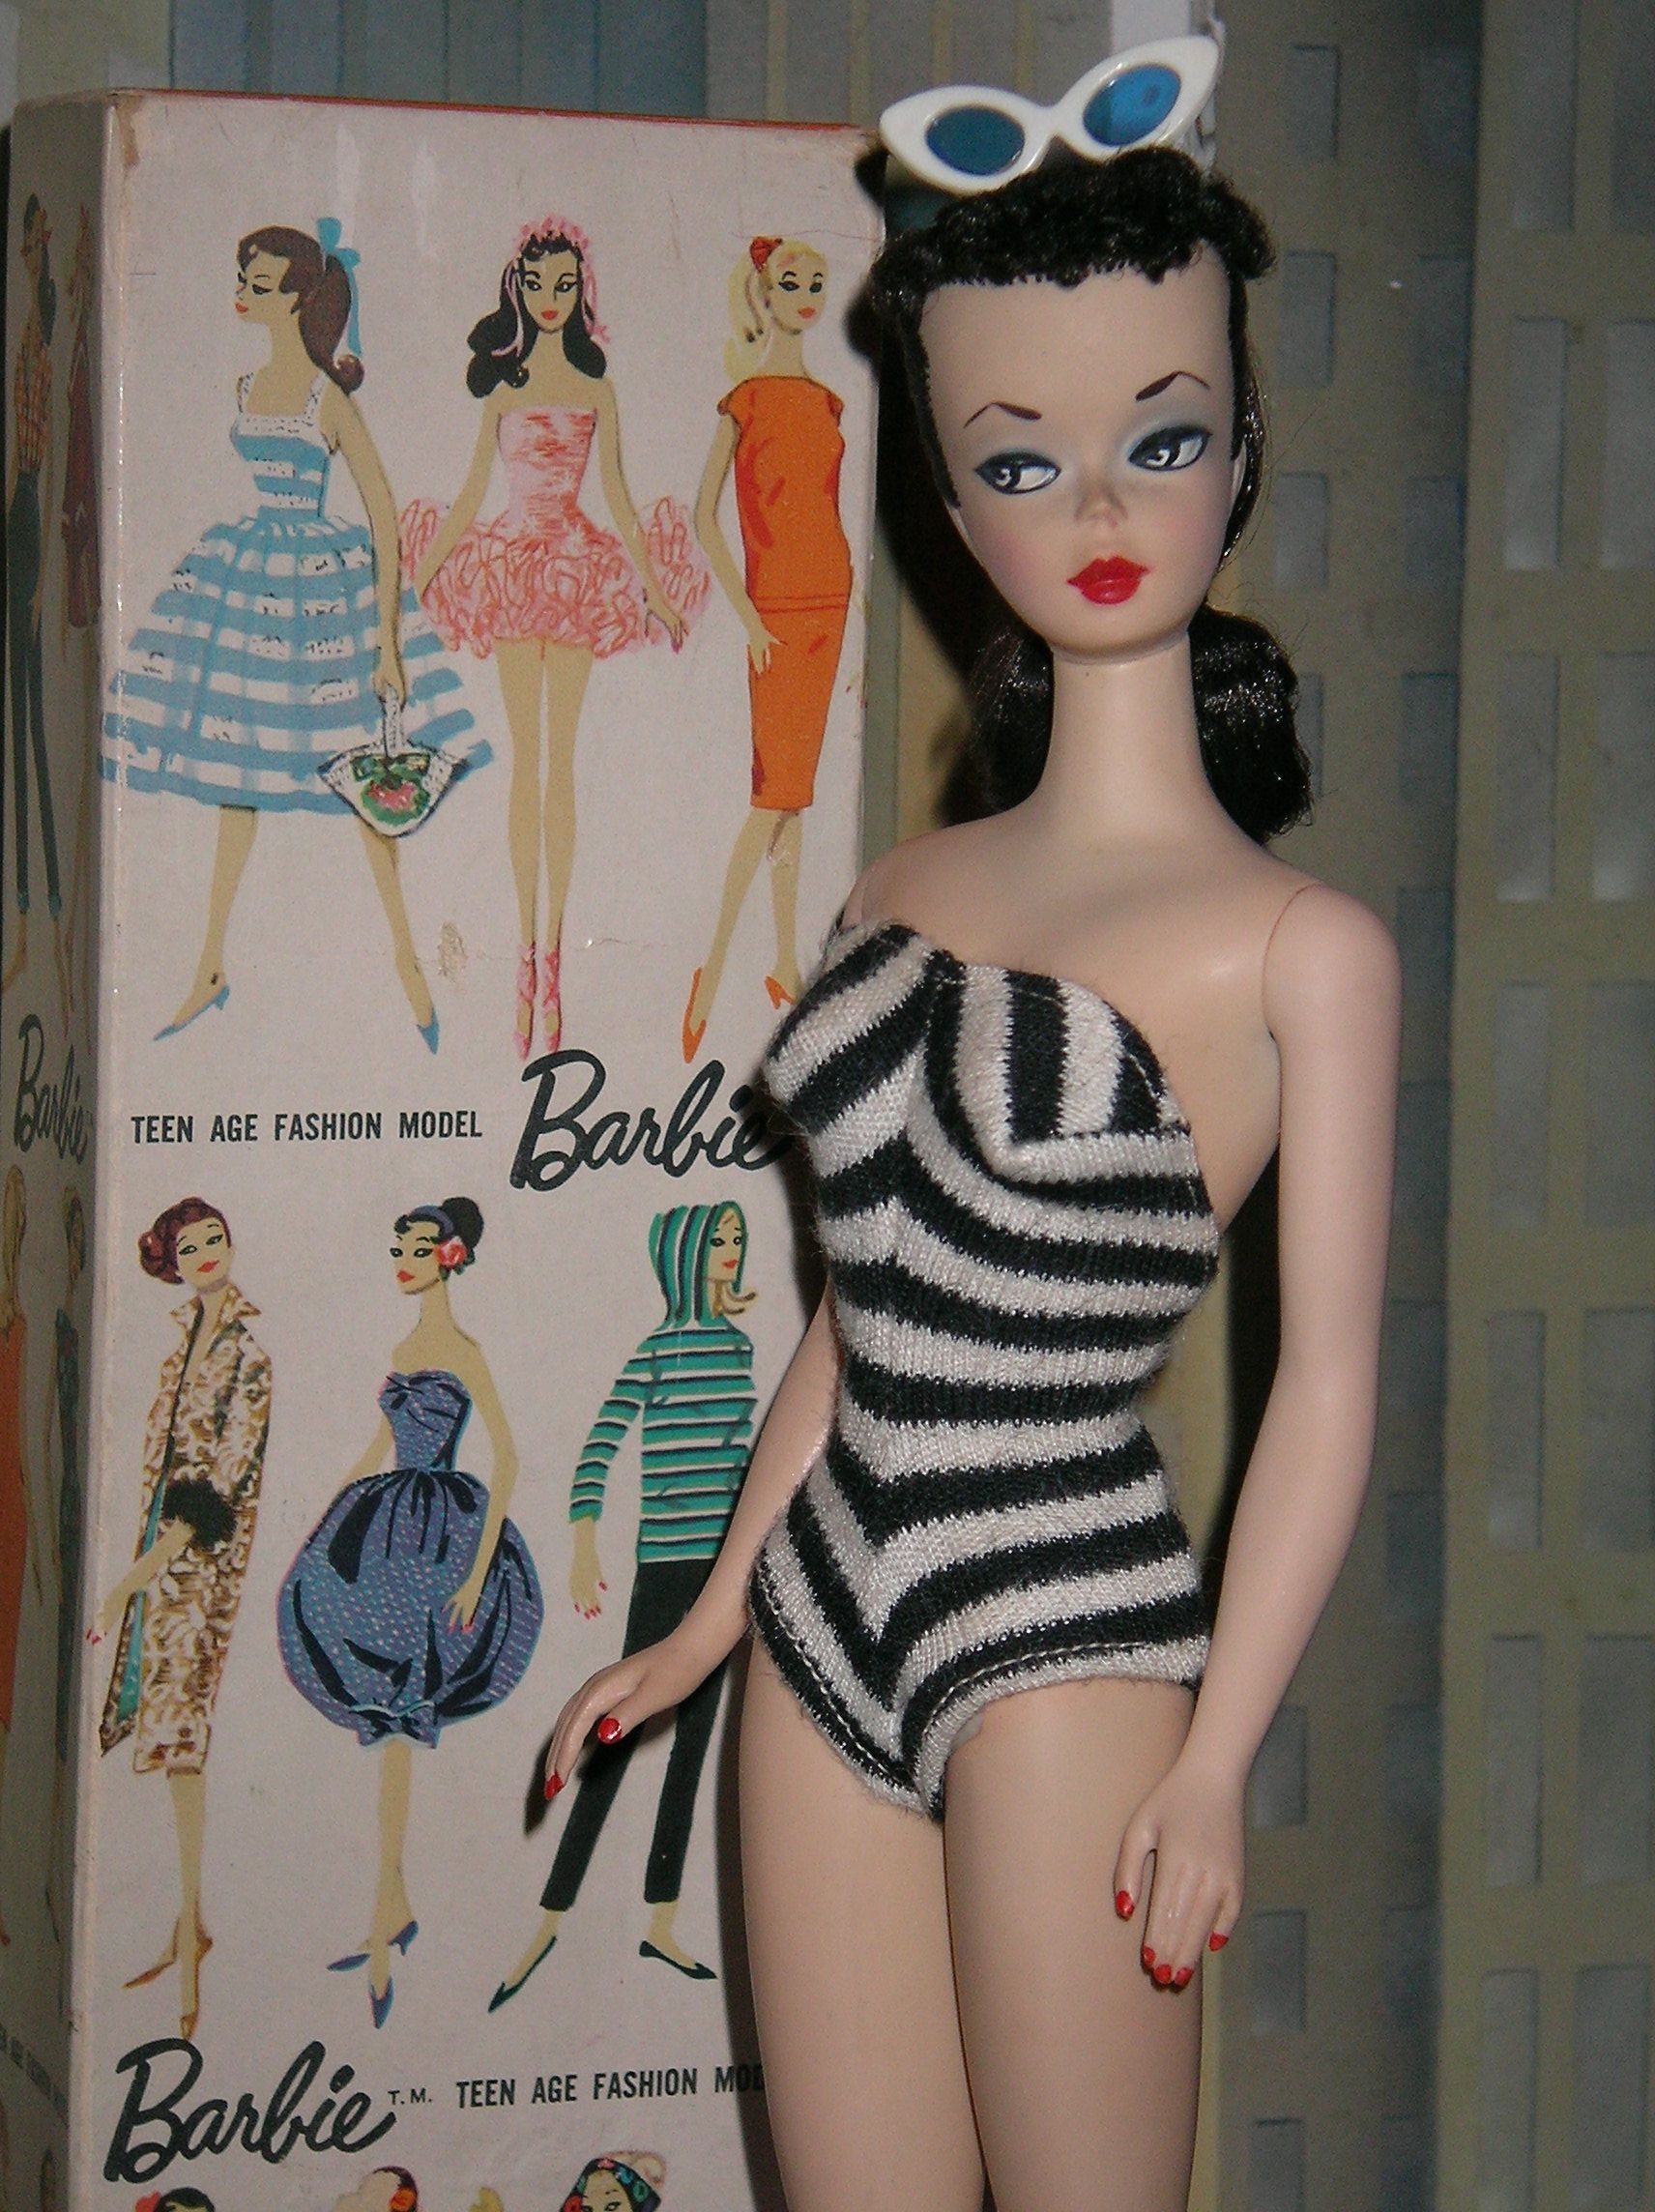 age to play with barbies